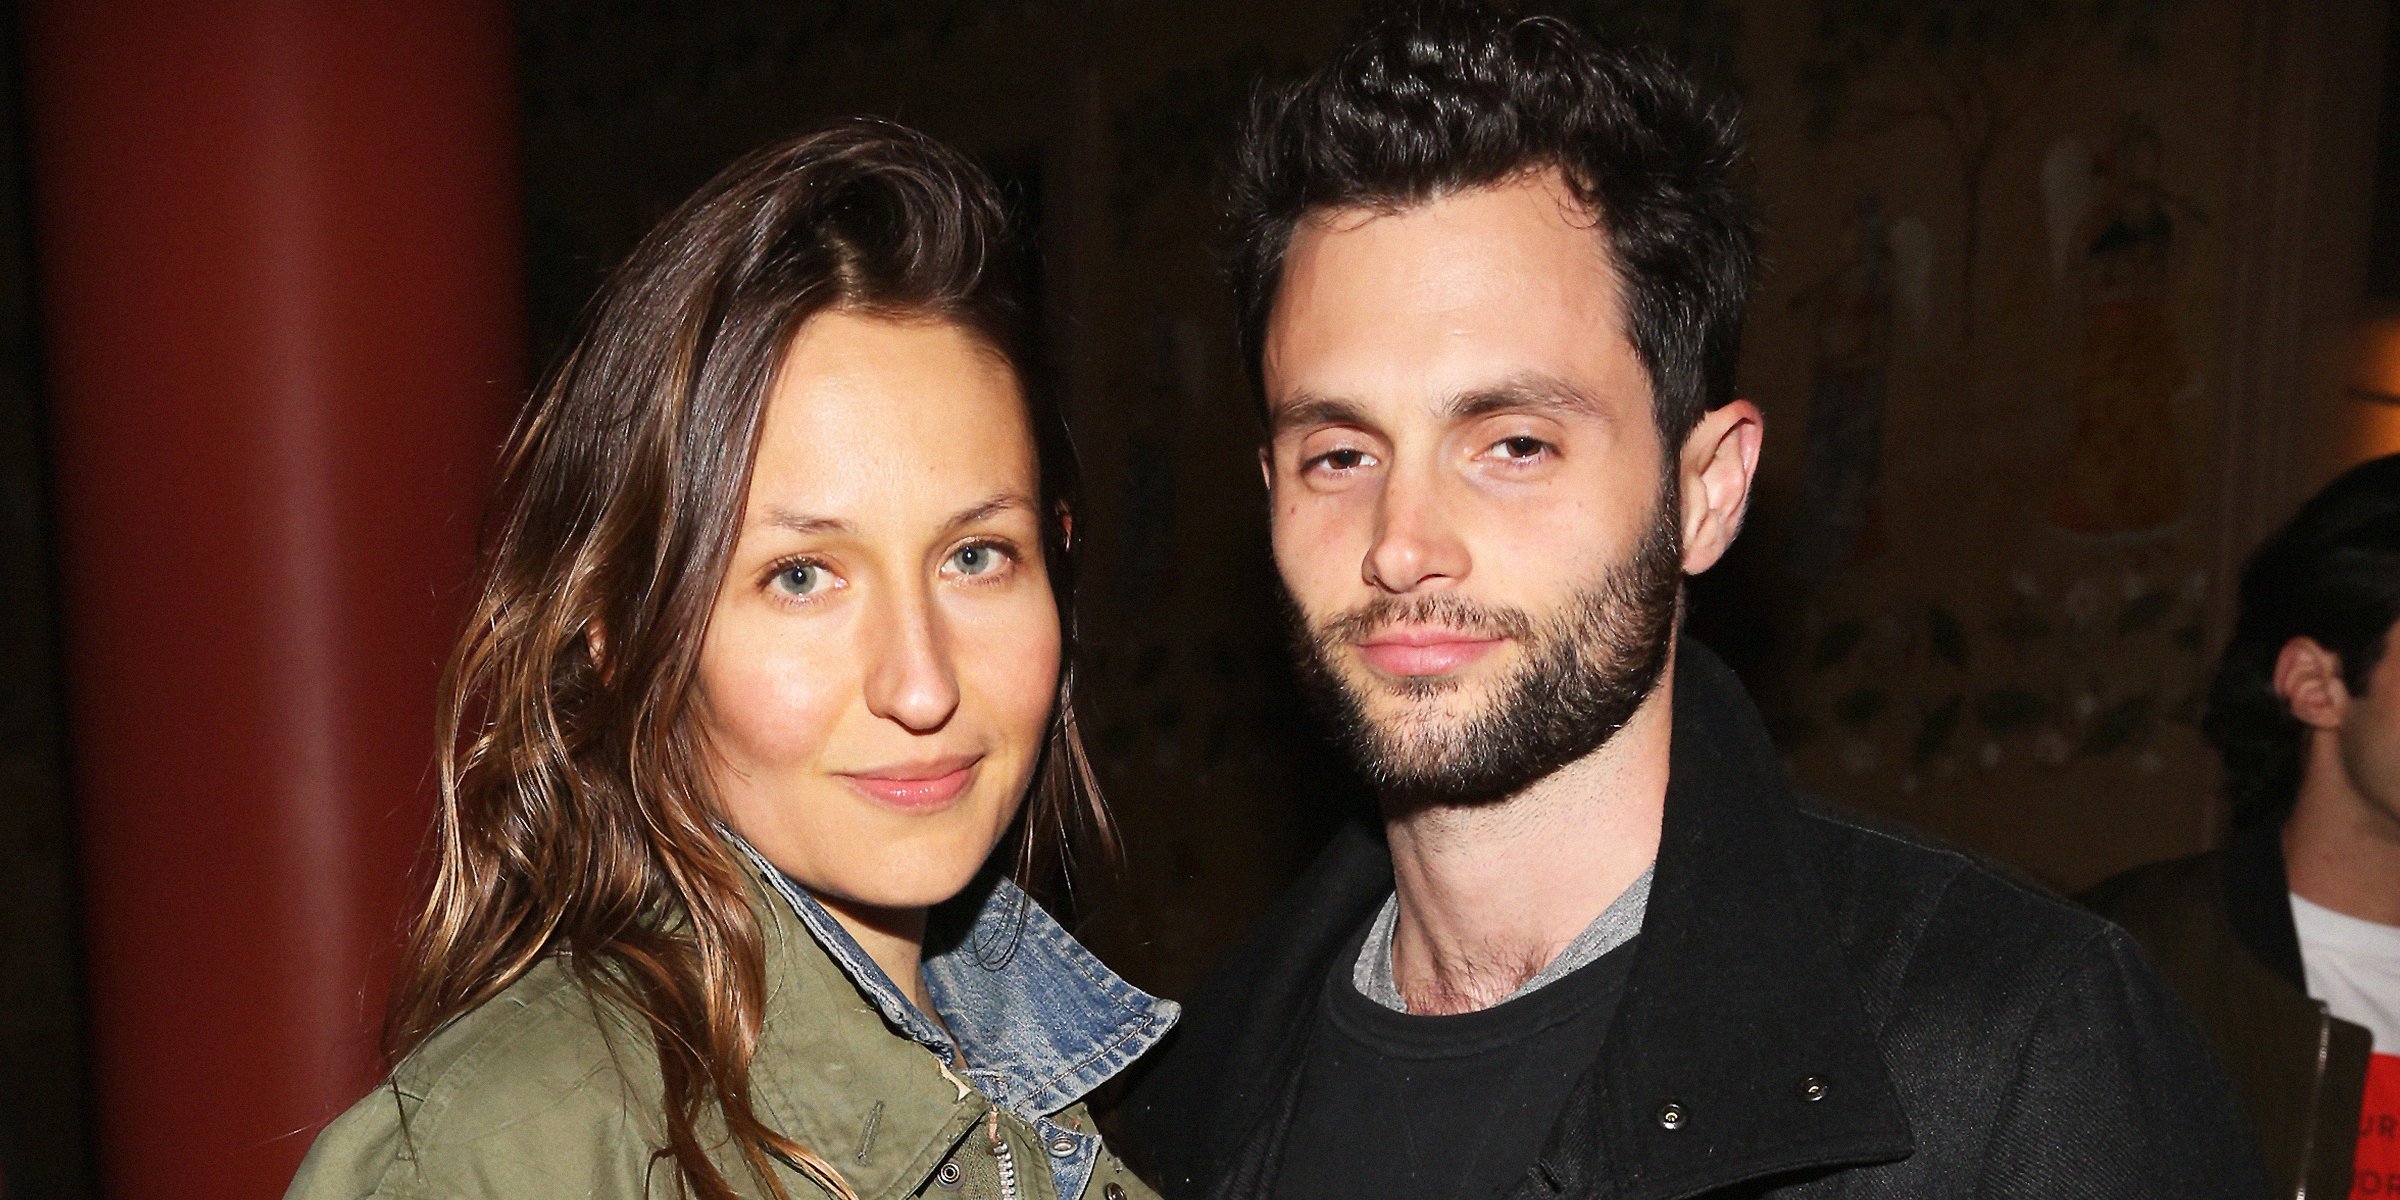 Domino Kirke and Penn Badgley | Source: Getty Images